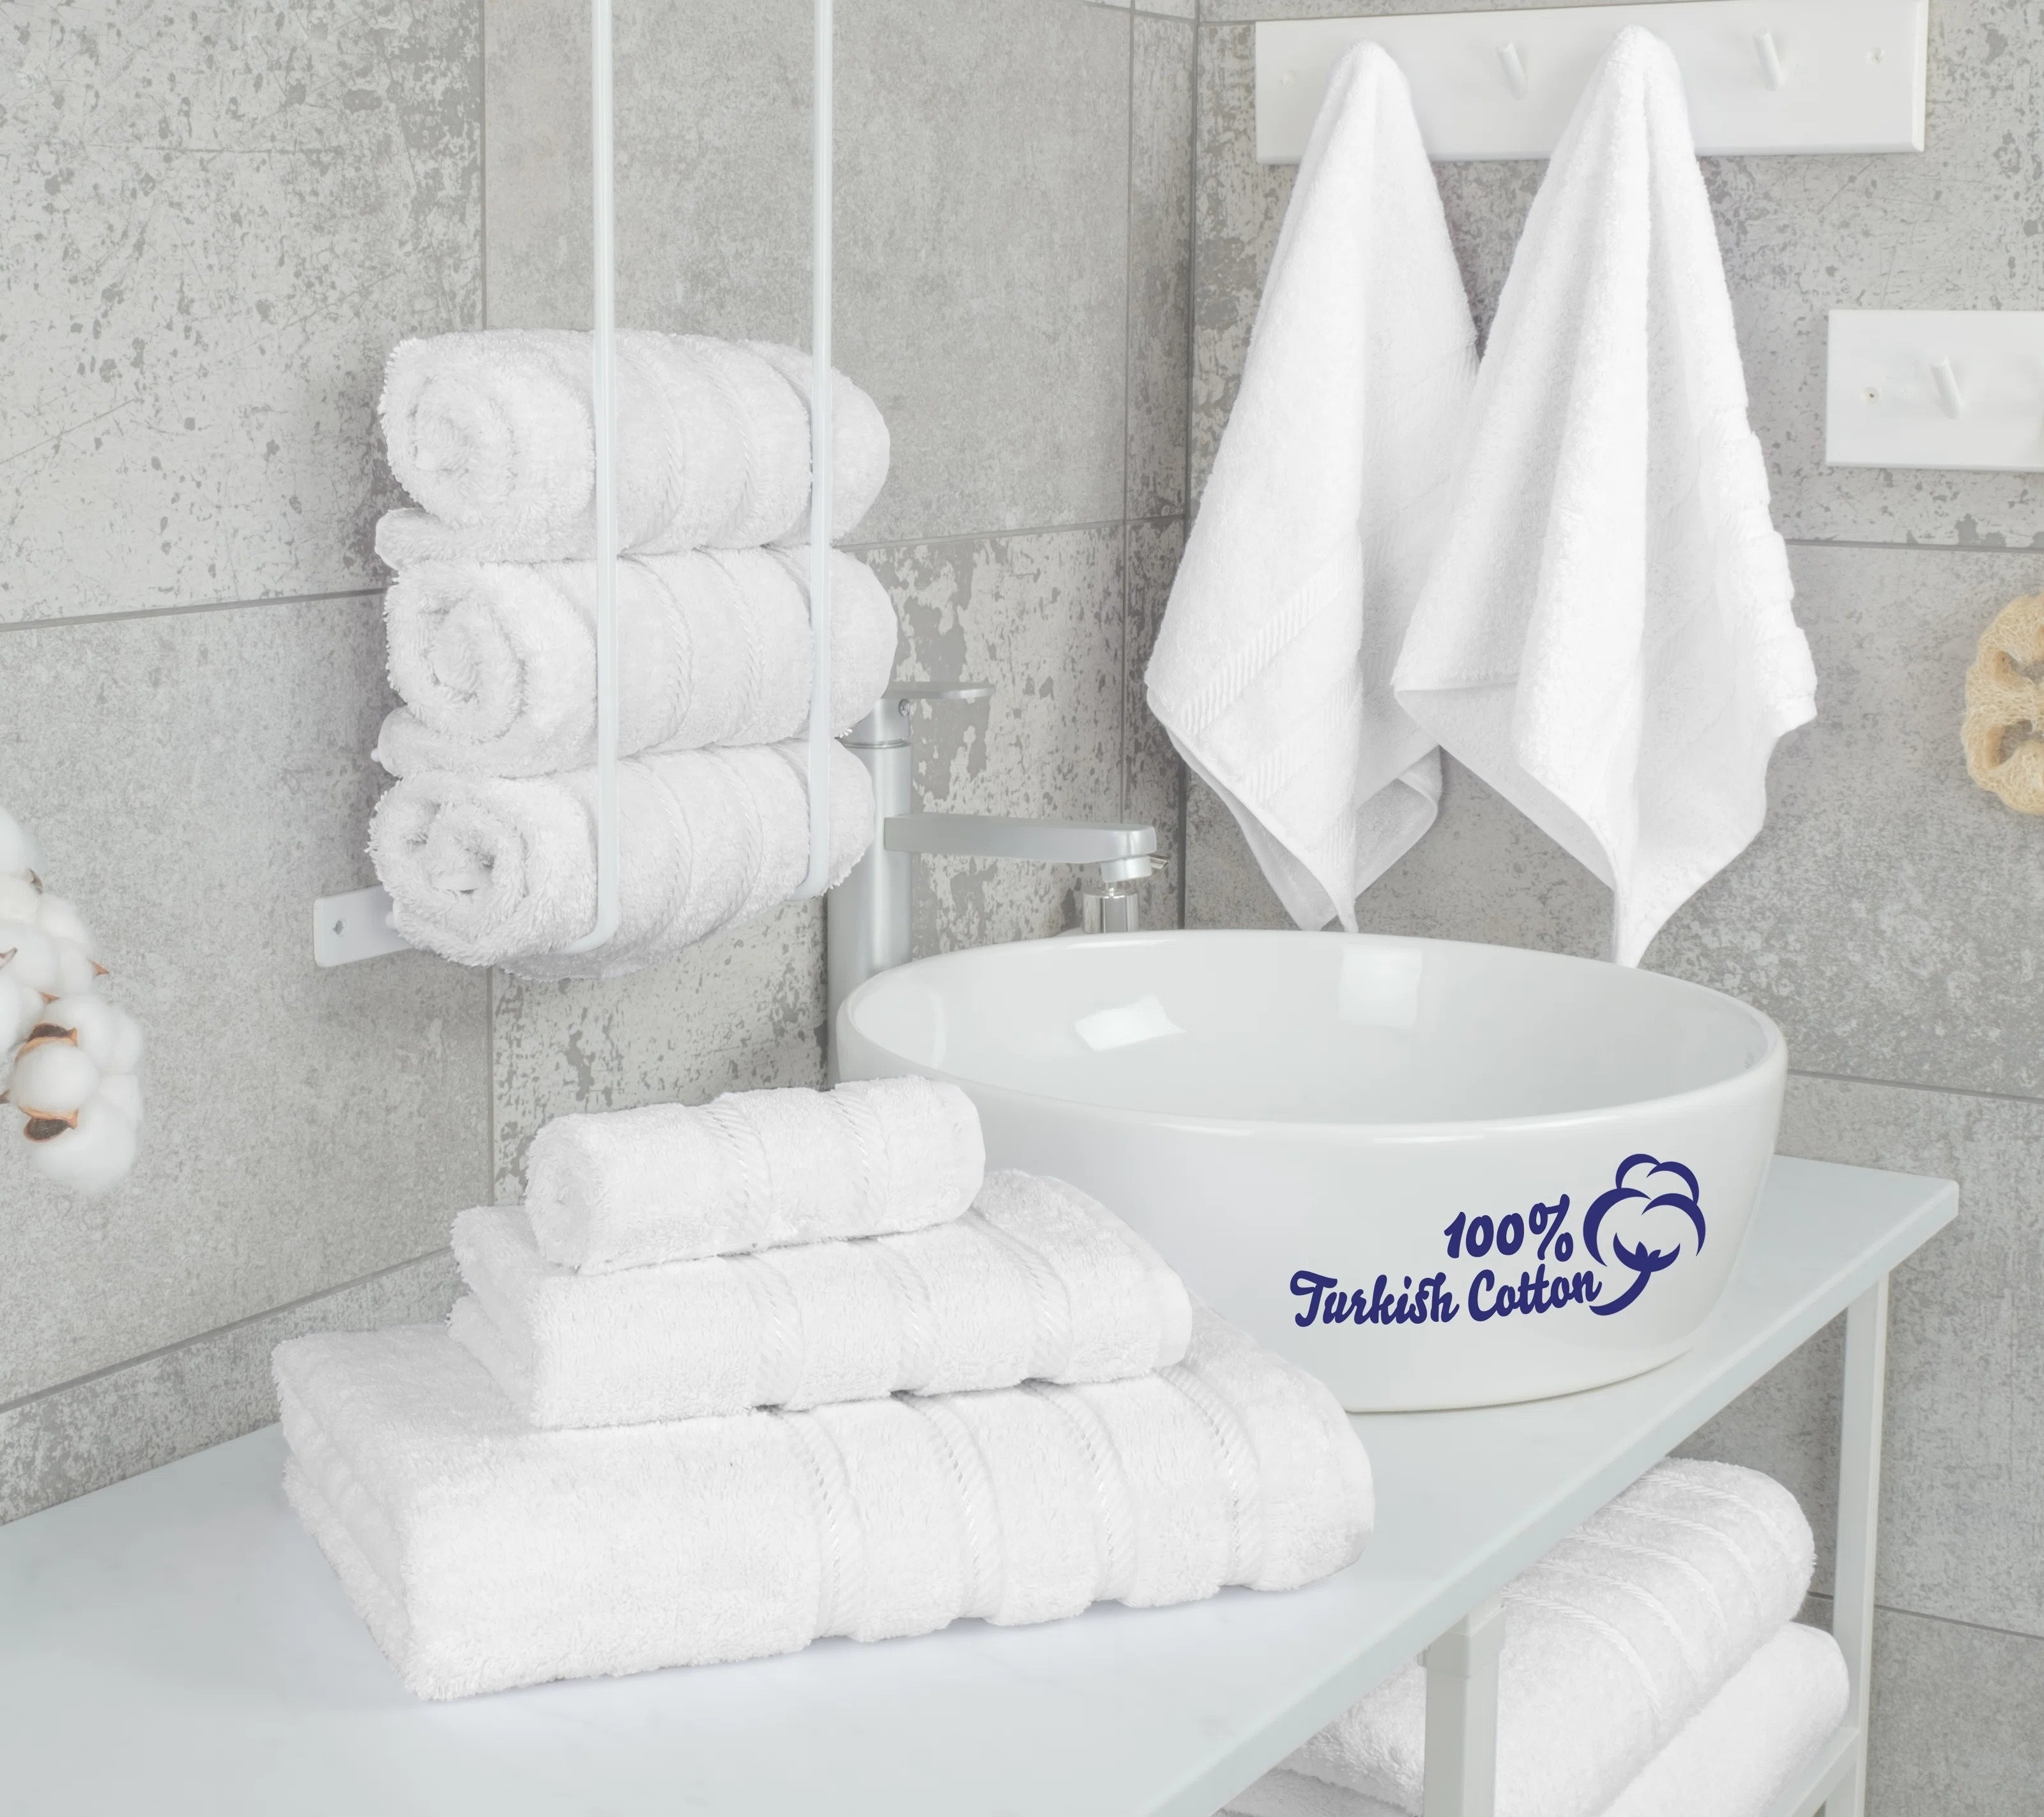 The towel set in white